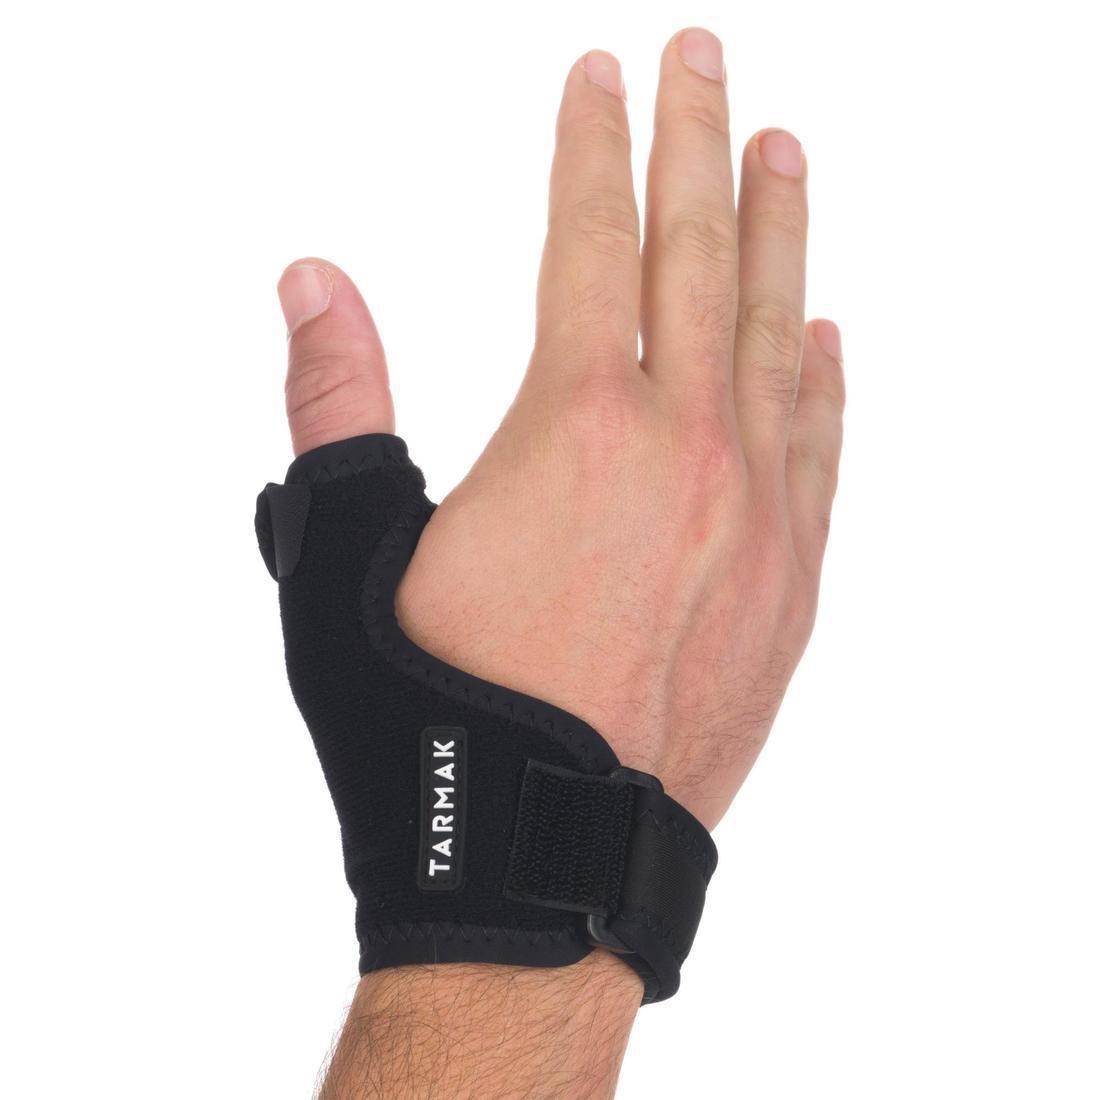 TARMAK - Strong 700 Left/Right Thumb Support, Black